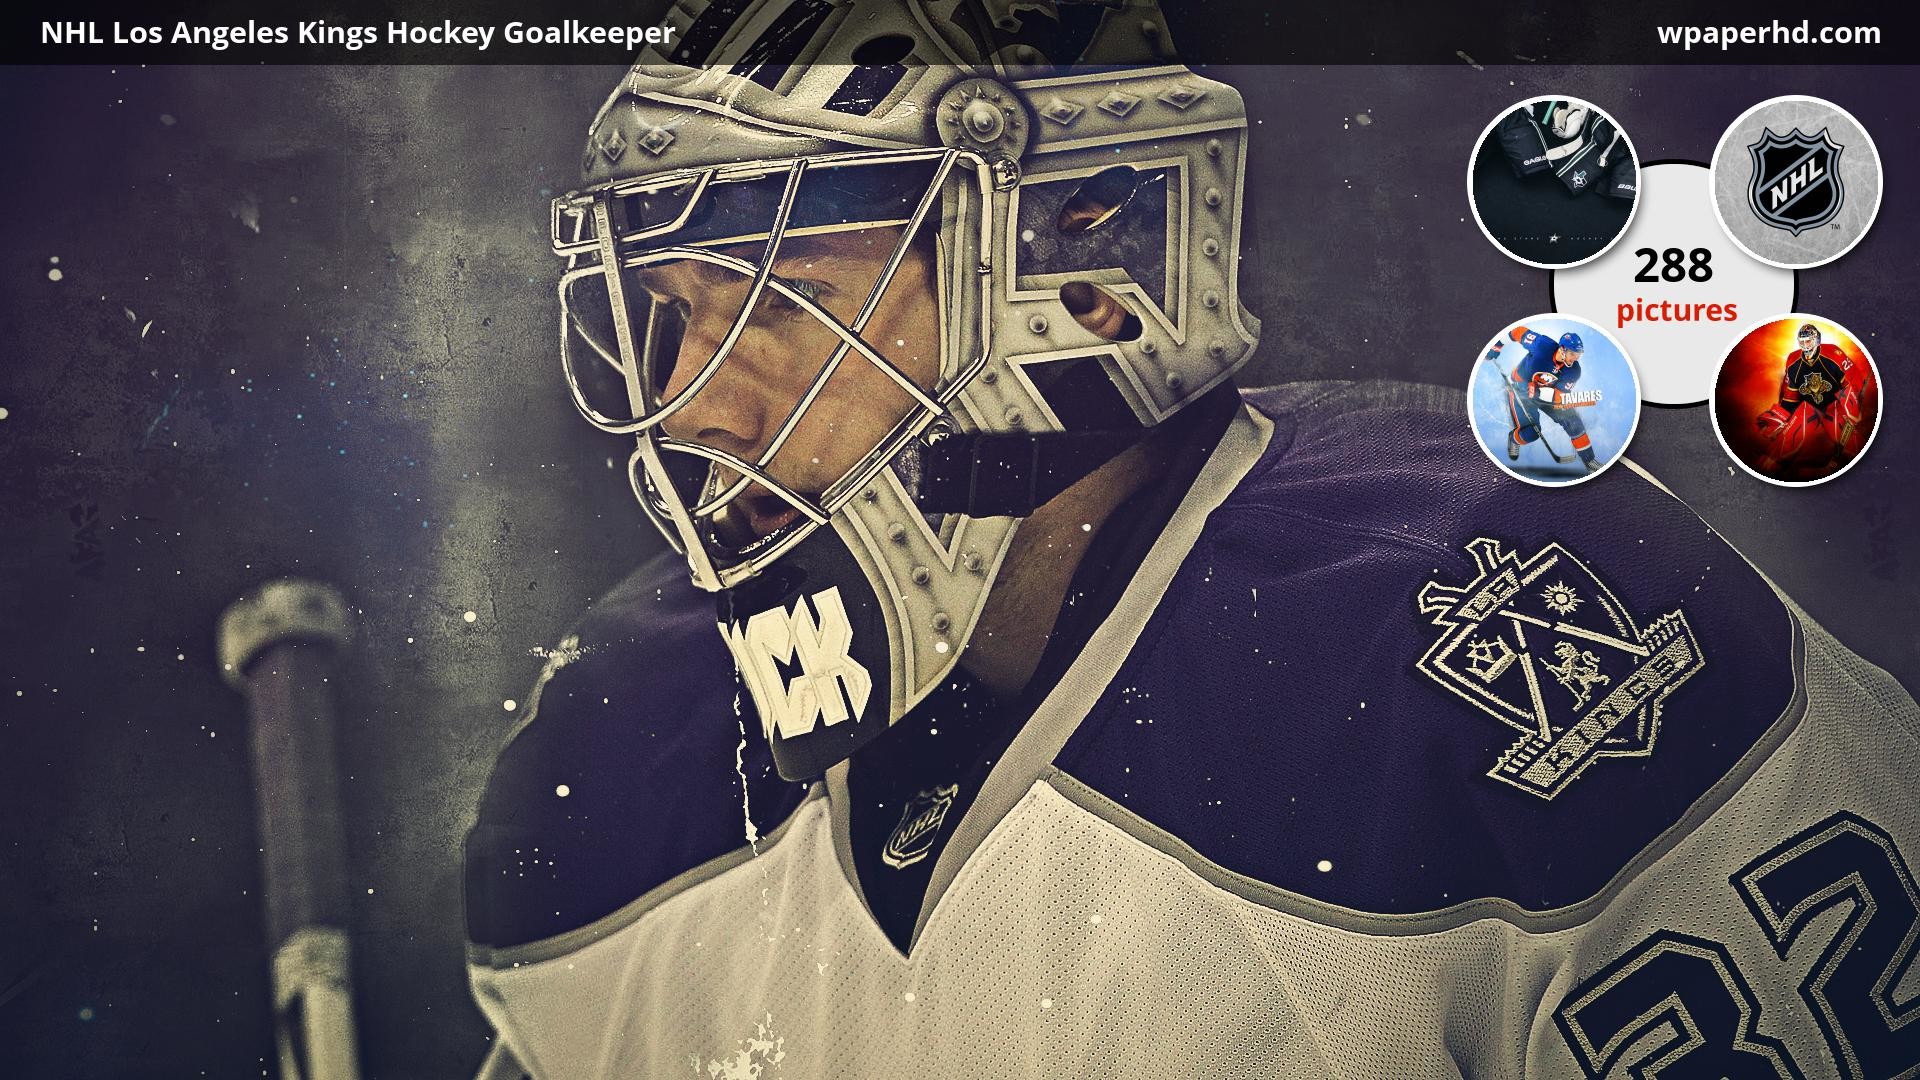 1920x1080 ... Angeles Kings Hockey Goalkeeper wallpaper, where you can download this  picture in Original size and ...